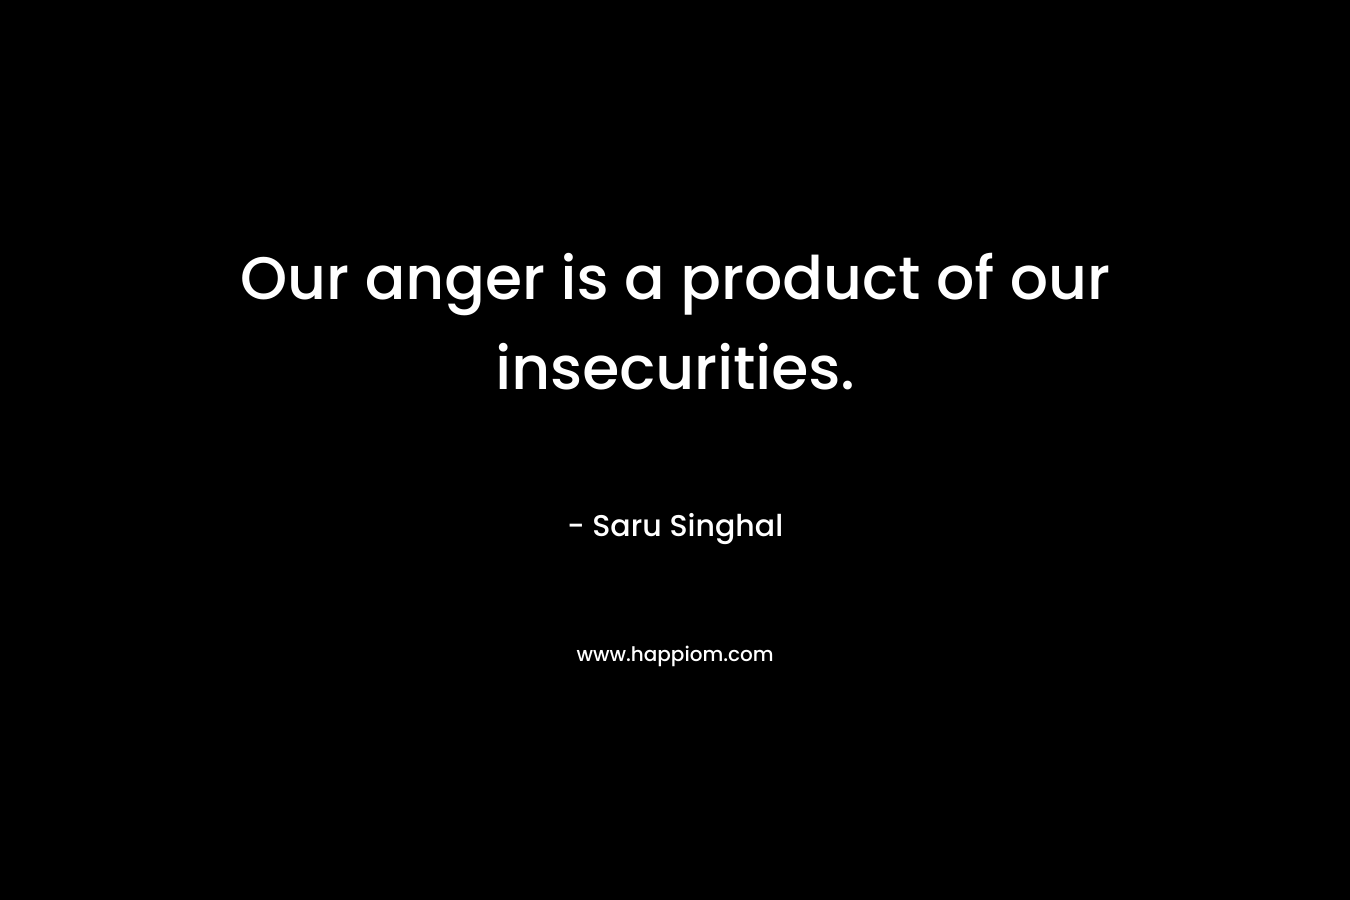 Our anger is a product of our insecurities. – Saru Singhal